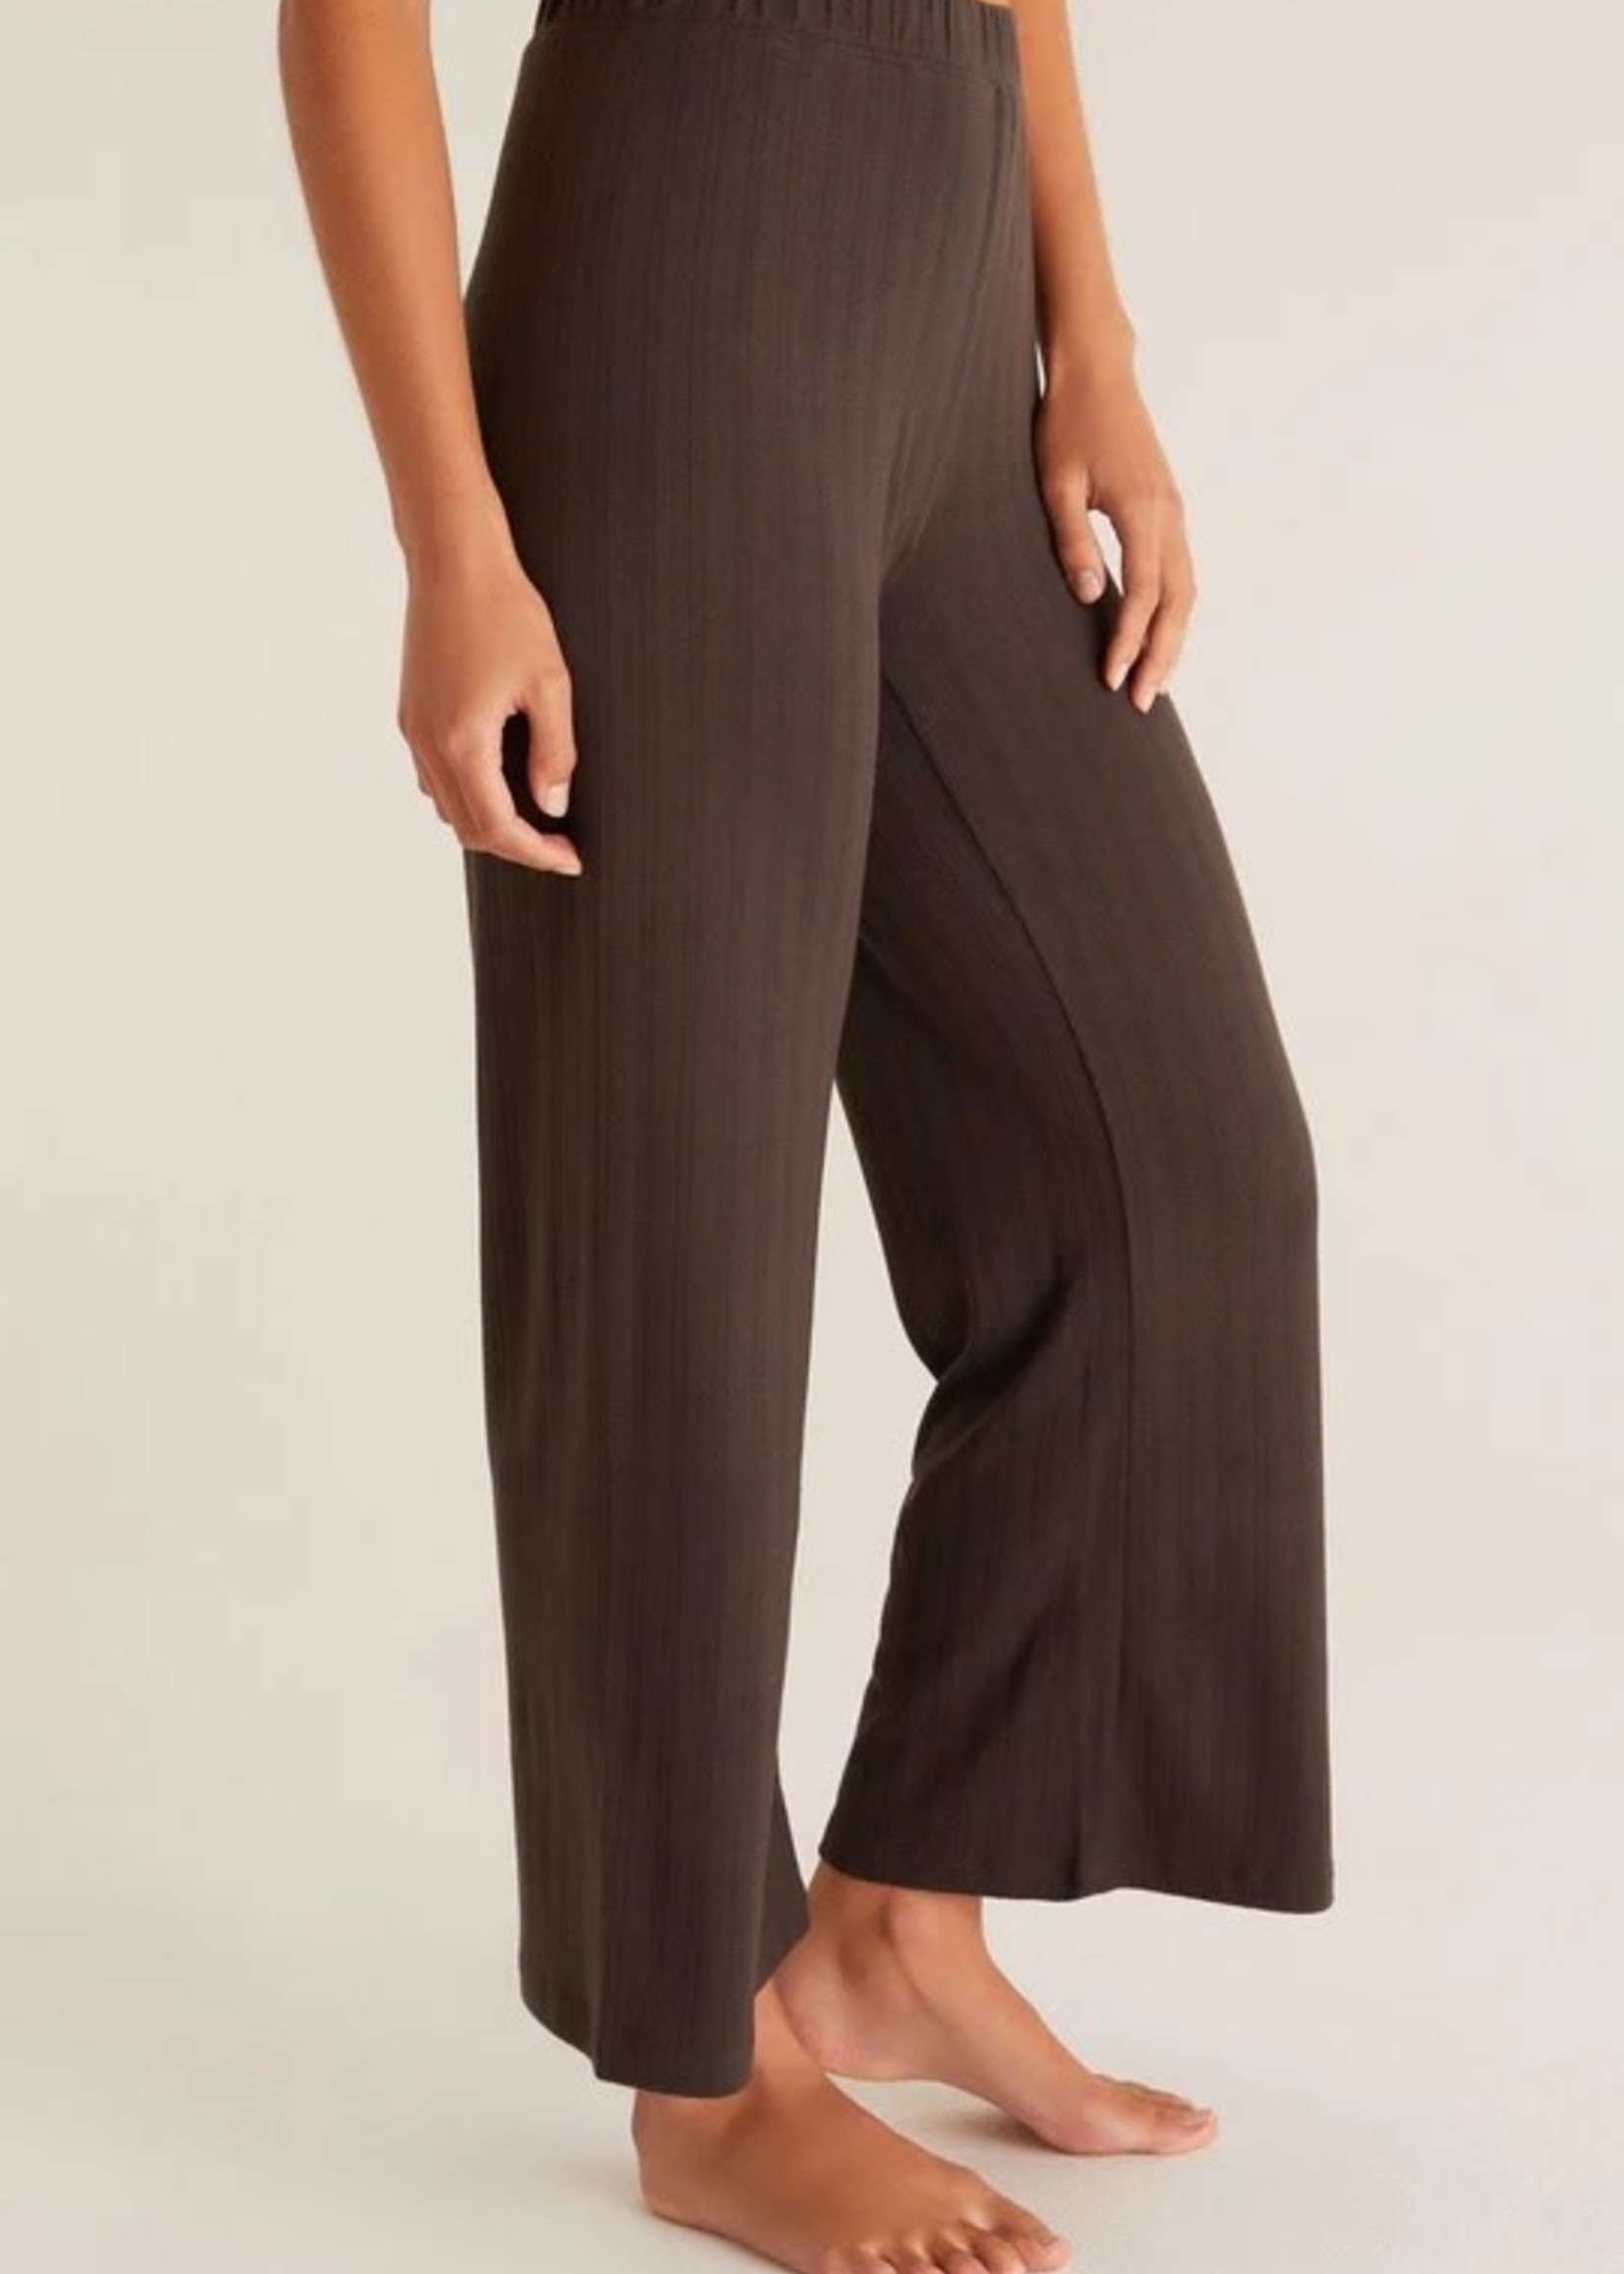 Z SUPPLY Homebound Pointelle Pant